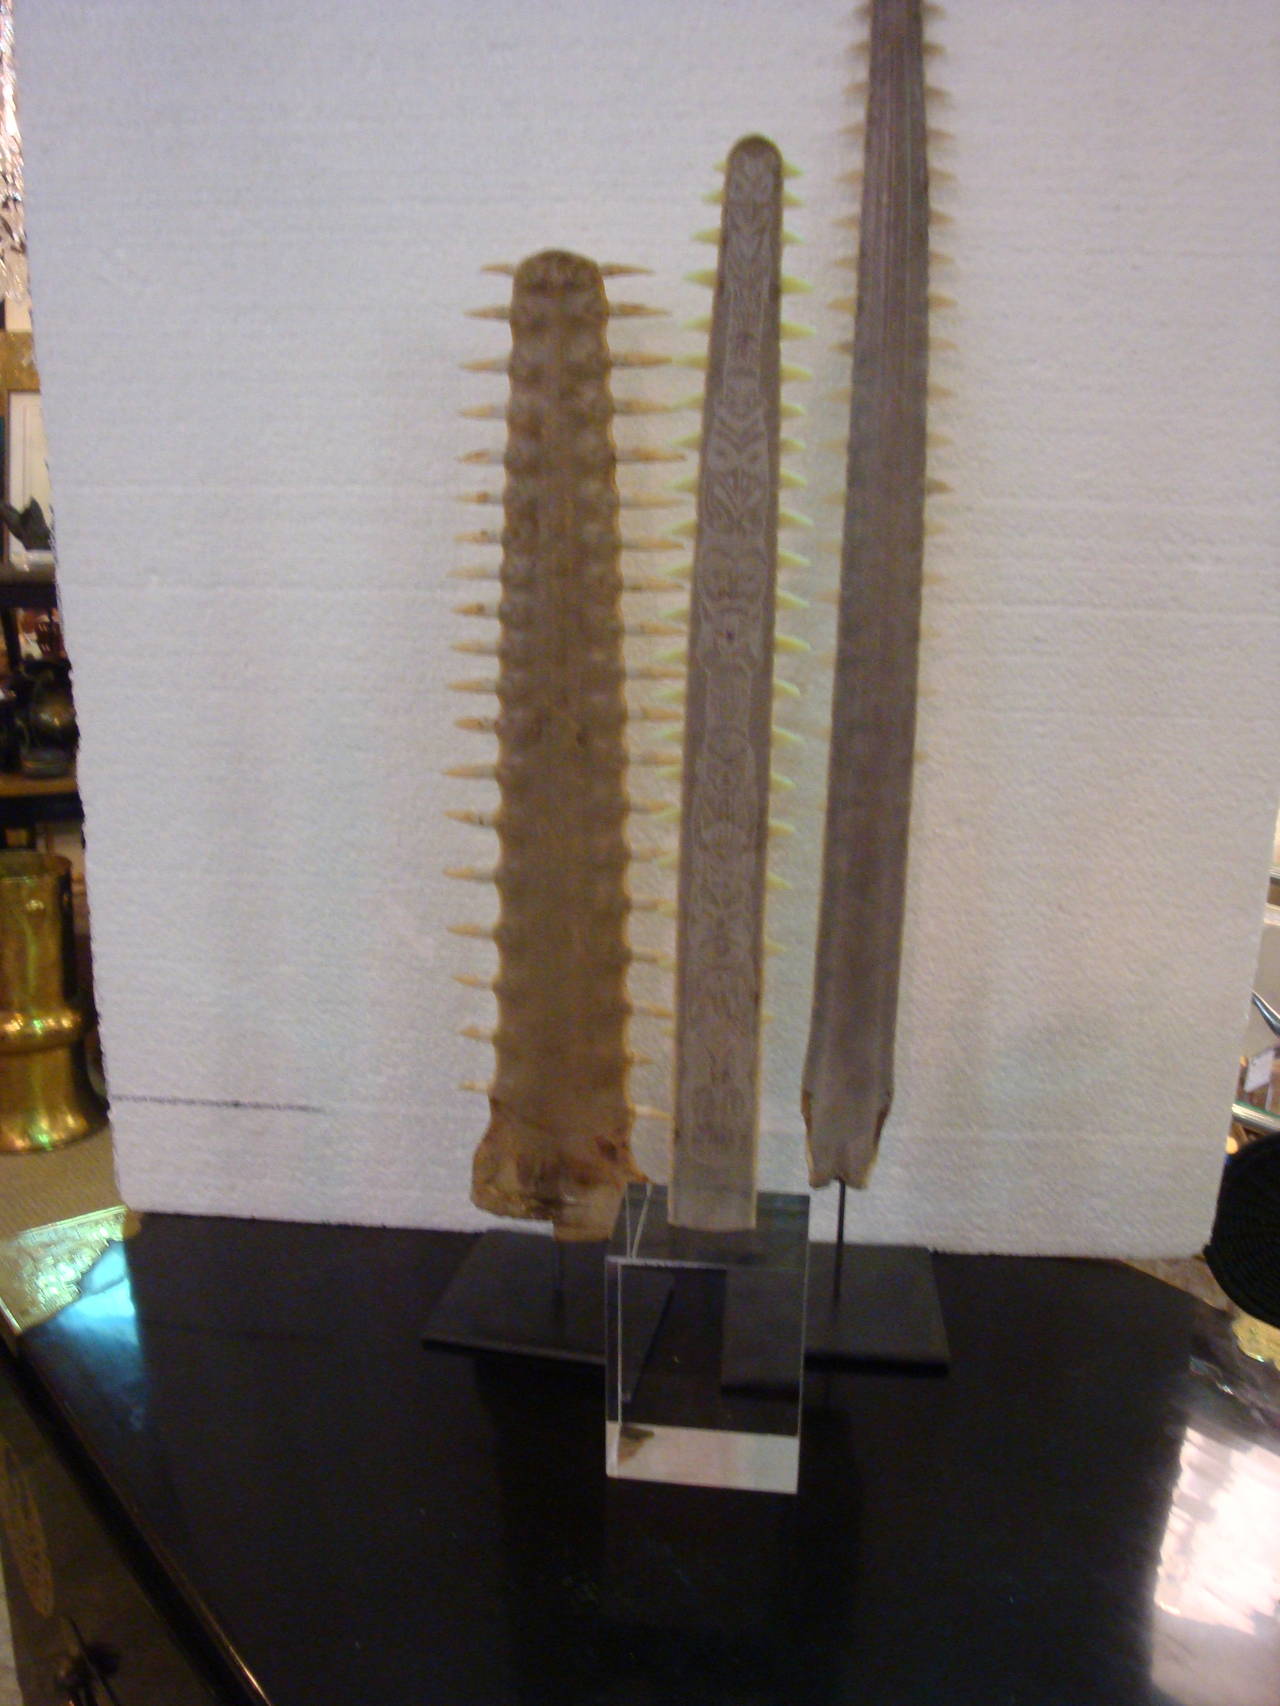 This is a collection of three sawtooth bills on various stands, one with ethnographic etching inscribed on bill.